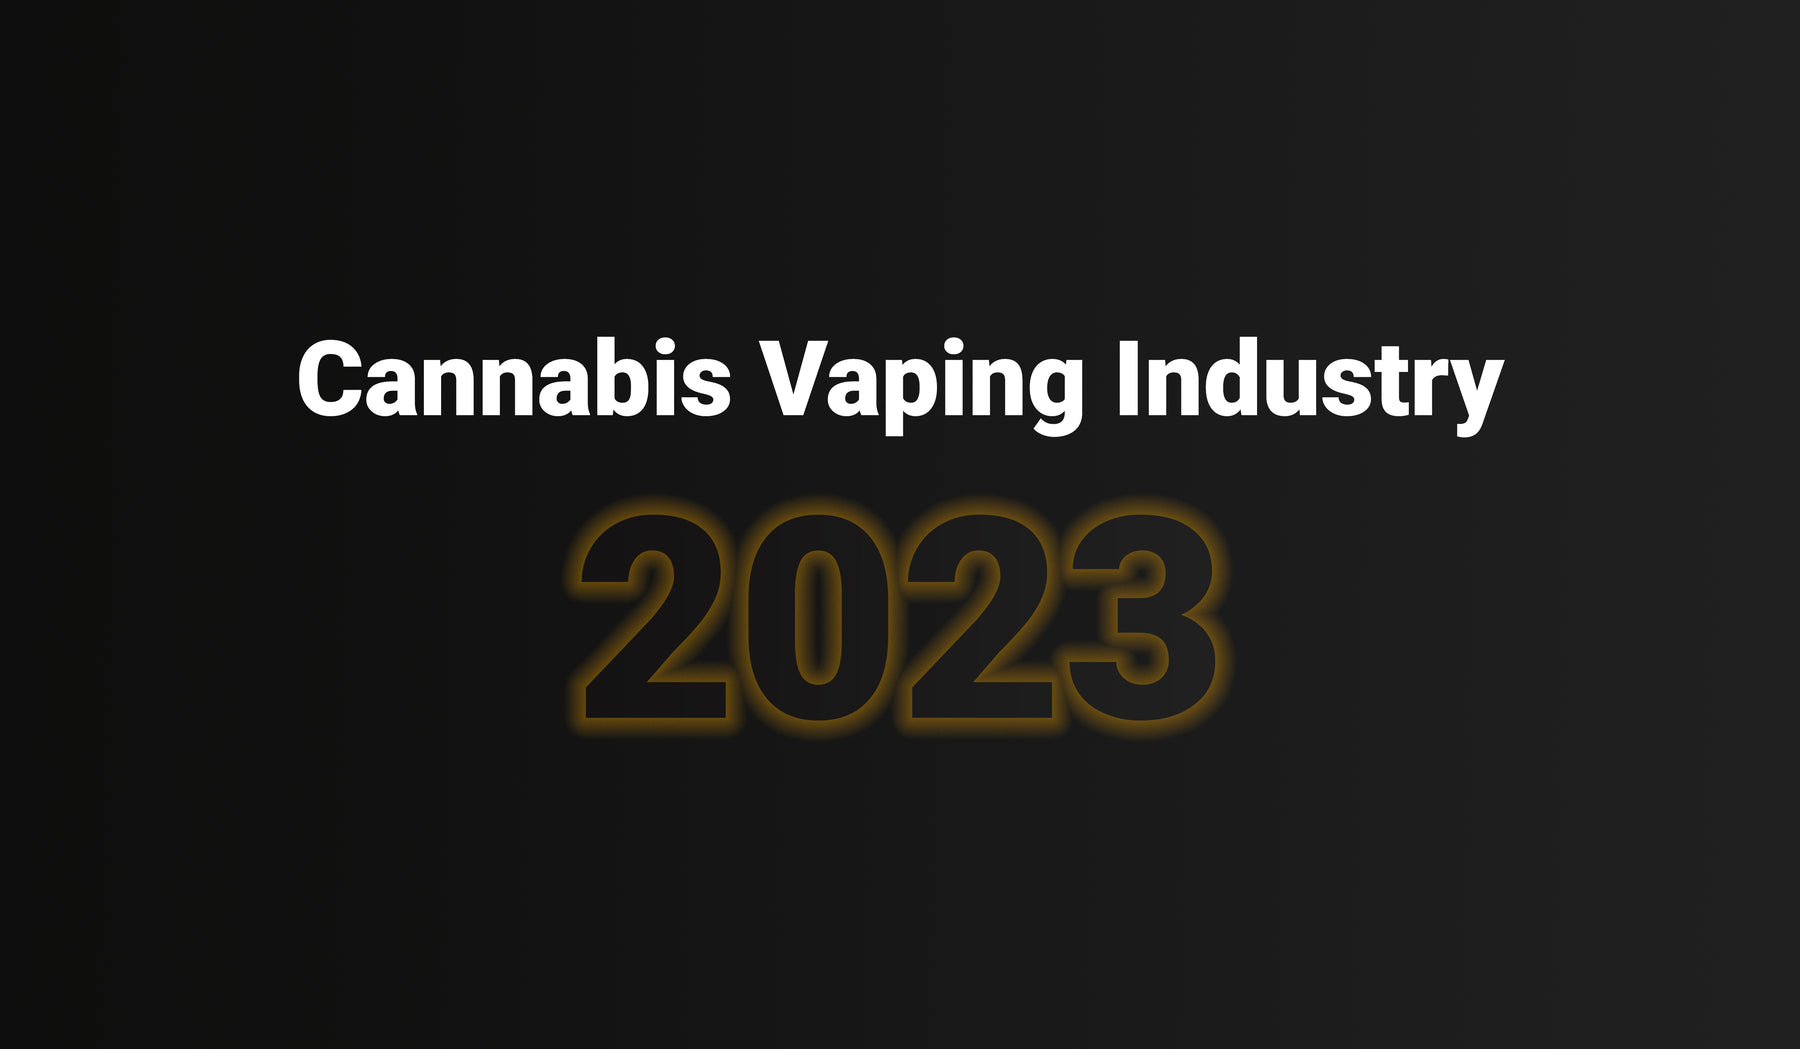 What the Cannabis Vaping Industry Will Look Like in 2023